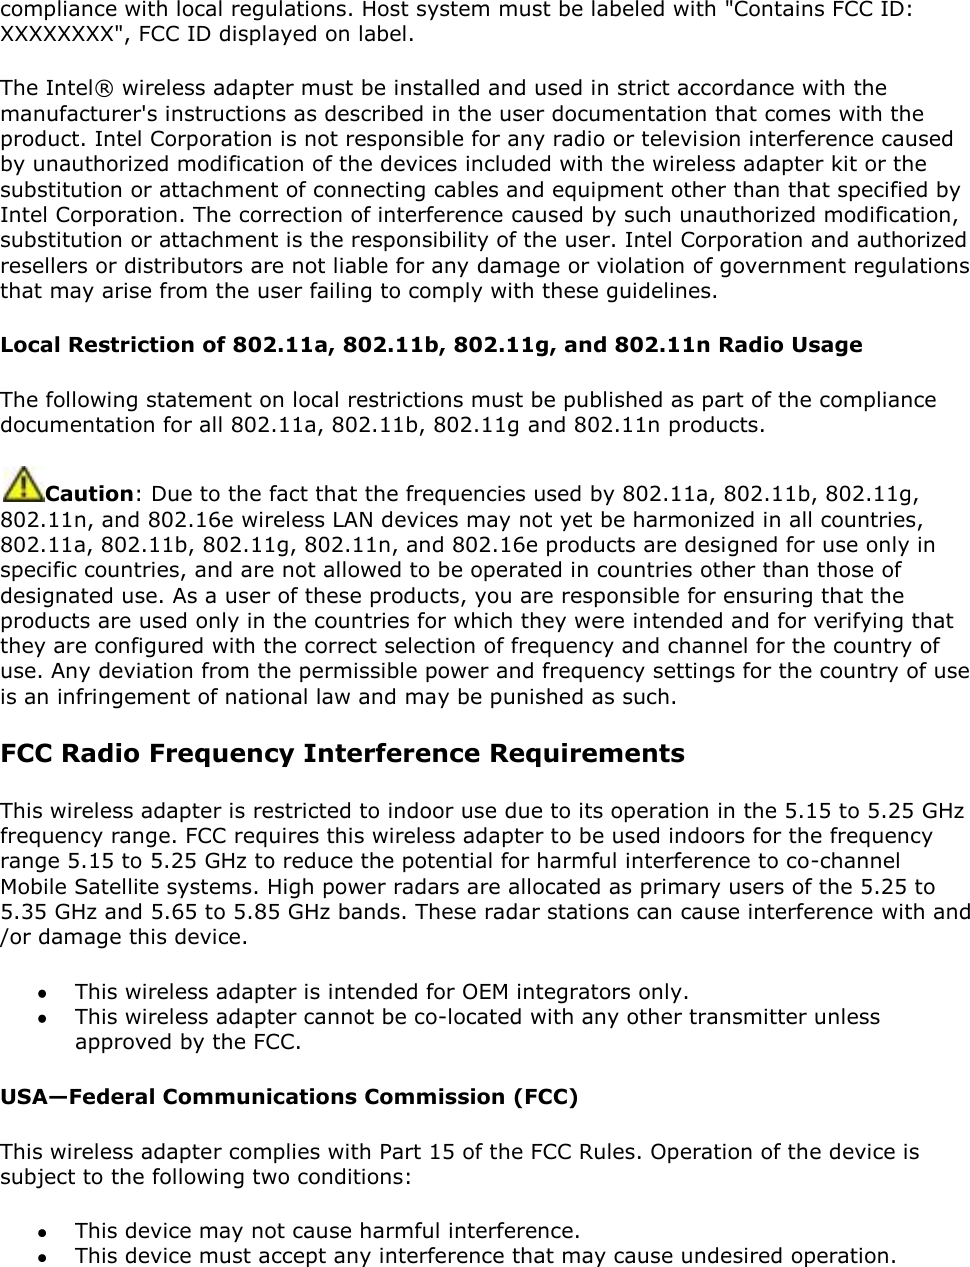 compliance with local regulations. Host system must be labeled with &quot;Contains FCC ID: XXXXXXXX&quot;, FCC ID displayed on label. The Intel® wireless adapter must be installed and used in strict accordance with the manufacturer&apos;s instructions as described in the user documentation that comes with the product. Intel Corporation is not responsible for any radio or television interference caused by unauthorized modification of the devices included with the wireless adapter kit or the substitution or attachment of connecting cables and equipment other than that specified by Intel Corporation. The correction of interference caused by such unauthorized modification, substitution or attachment is the responsibility of the user. Intel Corporation and authorized resellers or distributors are not liable for any damage or violation of government regulations that may arise from the user failing to comply with these guidelines. Local Restriction of 802.11a, 802.11b, 802.11g, and 802.11n Radio Usage The following statement on local restrictions must be published as part of the compliance documentation for all 802.11a, 802.11b, 802.11g and 802.11n products.  Caution: Due to the fact that the frequencies used by 802.11a, 802.11b, 802.11g, 802.11n, and 802.16e wireless LAN devices may not yet be harmonized in all countries, 802.11a, 802.11b, 802.11g, 802.11n, and 802.16e products are designed for use only in specific countries, and are not allowed to be operated in countries other than those of designated use. As a user of these products, you are responsible for ensuring that the products are used only in the countries for which they were intended and for verifying that they are configured with the correct selection of frequency and channel for the country of use. Any deviation from the permissible power and frequency settings for the country of use is an infringement of national law and may be punished as such.  FCC Radio Frequency Interference Requirements  This wireless adapter is restricted to indoor use due to its operation in the 5.15 to 5.25 GHz frequency range. FCC requires this wireless adapter to be used indoors for the frequency range 5.15 to 5.25 GHz to reduce the potential for harmful interference to co-channel Mobile Satellite systems. High power radars are allocated as primary users of the 5.25 to 5.35 GHz and 5.65 to 5.85 GHz bands. These radar stations can cause interference with and /or damage this device.   This wireless adapter is intended for OEM integrators only.  This wireless adapter cannot be co-located with any other transmitter unless approved by the FCC. USA—Federal Communications Commission (FCC) This wireless adapter complies with Part 15 of the FCC Rules. Operation of the device is subject to the following two conditions:  This device may not cause harmful interference.  This device must accept any interference that may cause undesired operation. 